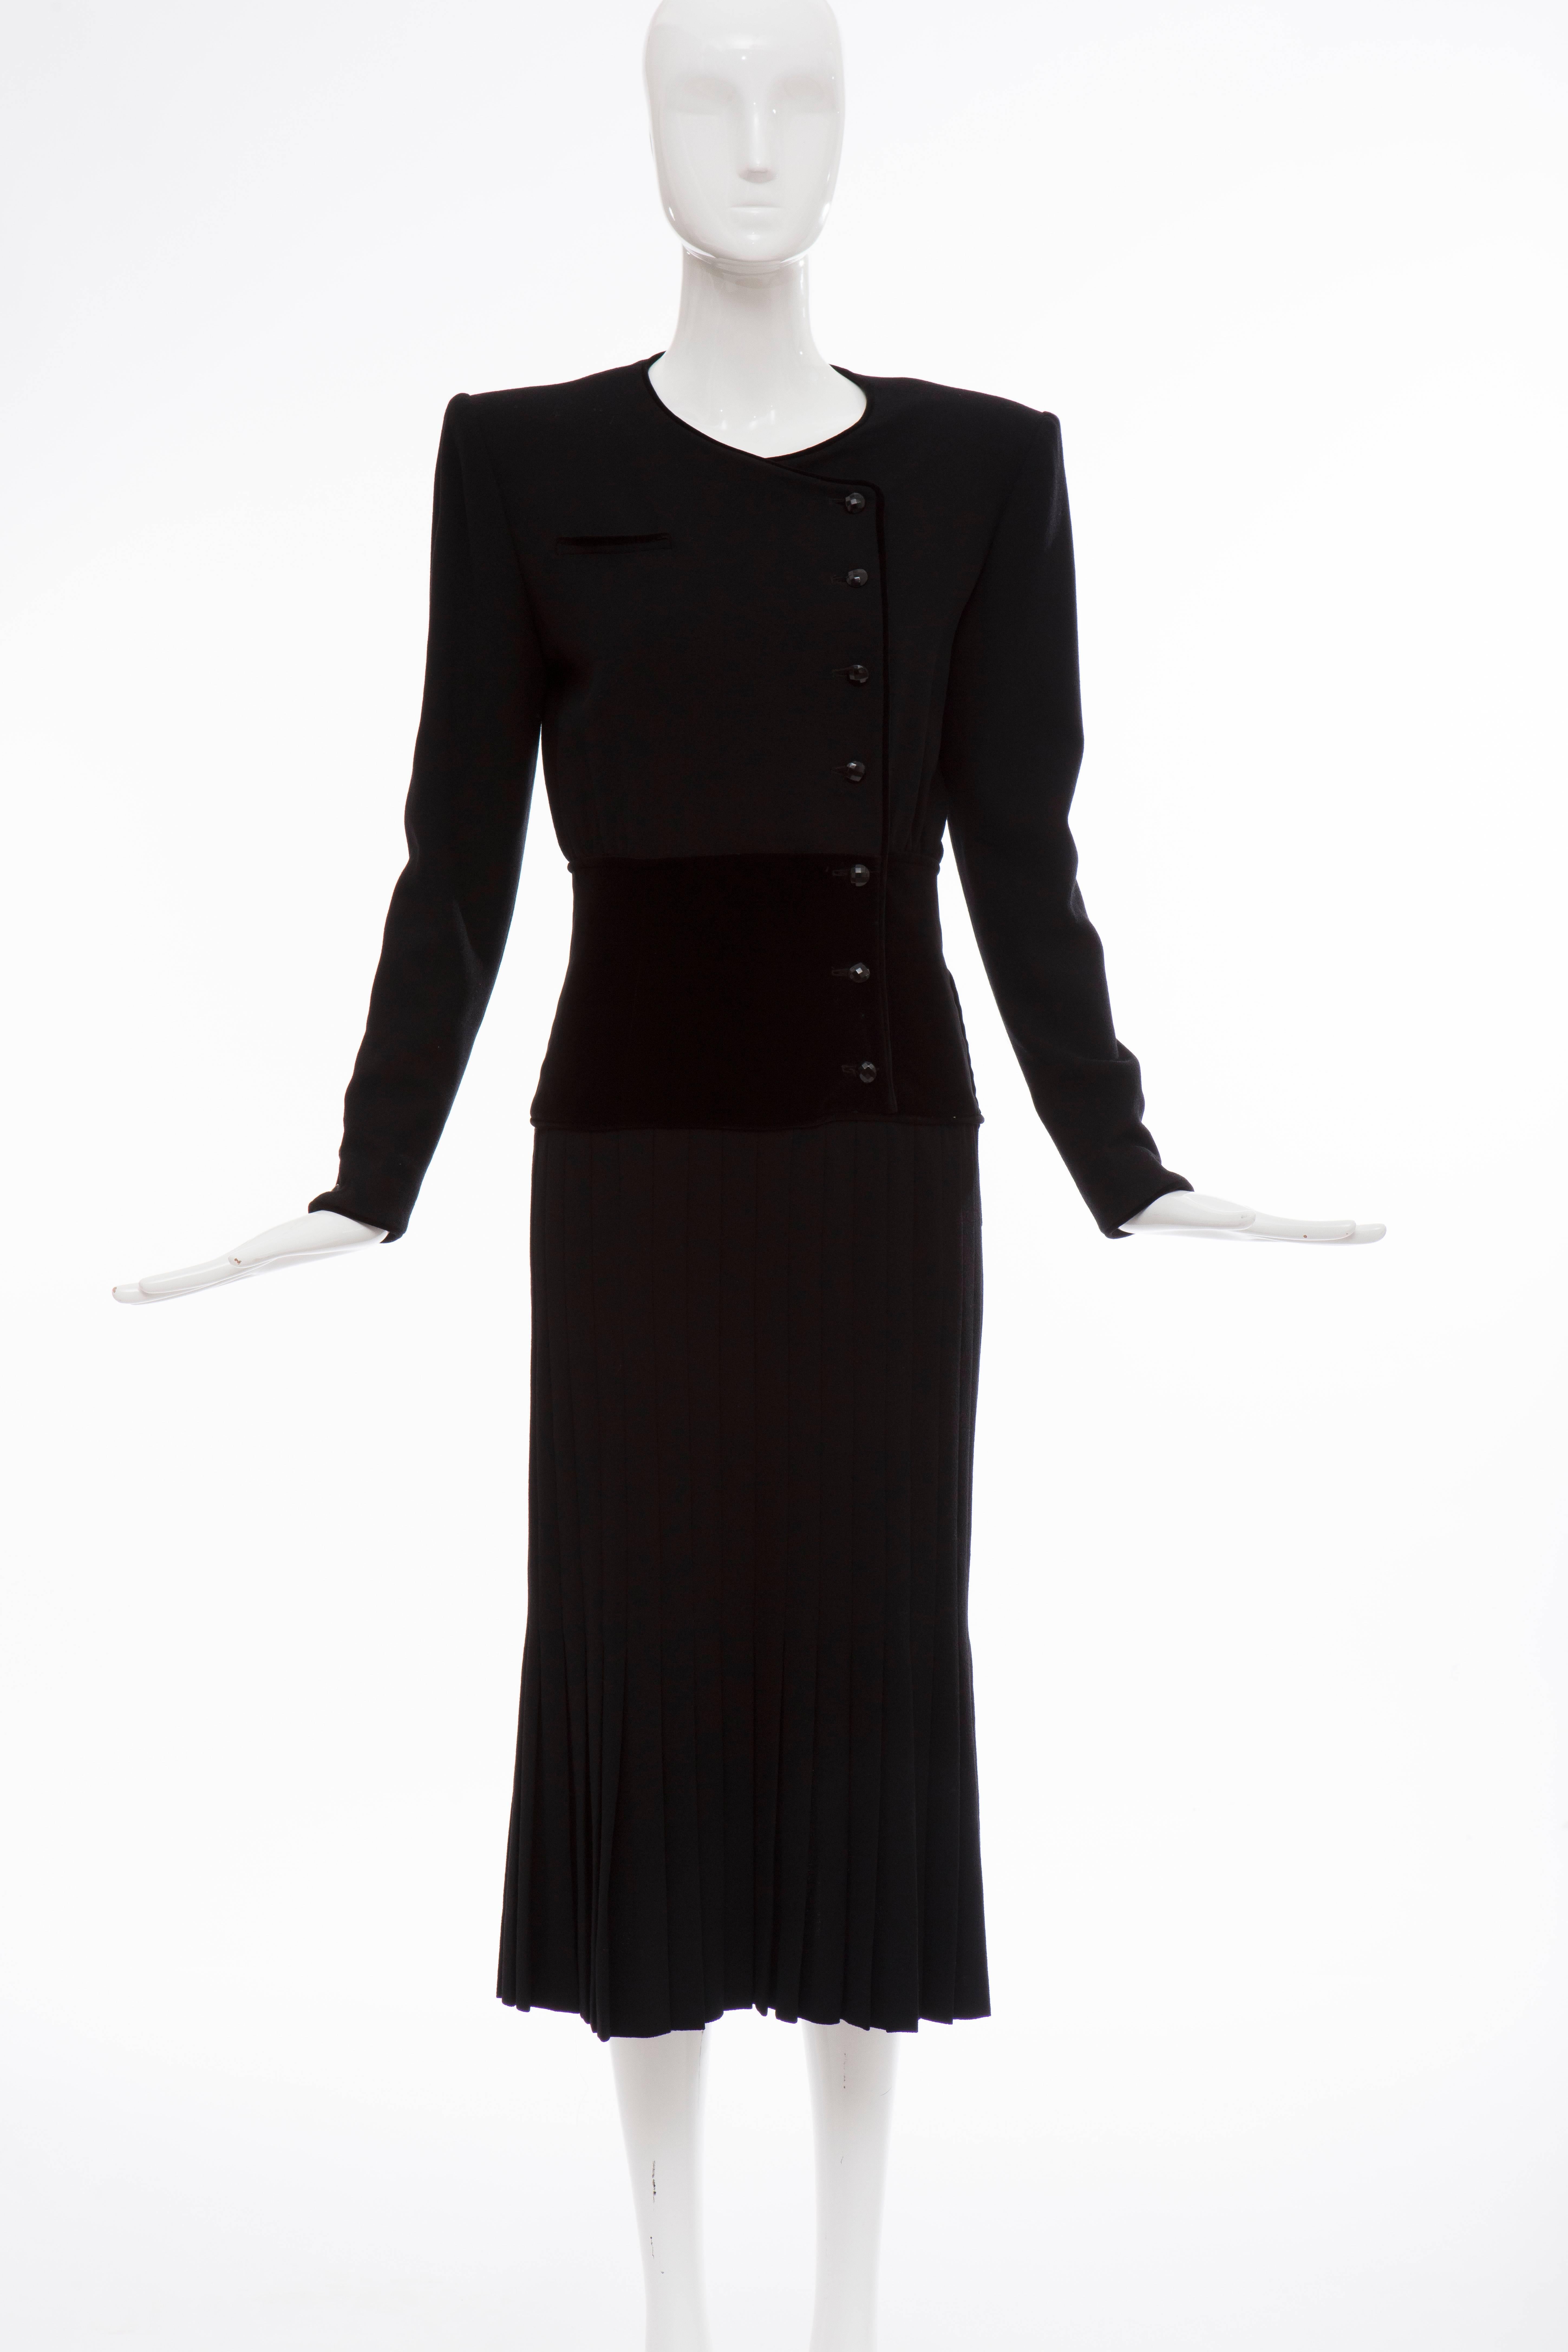 Valentino, Circa 1980's black wool crepe, button front, faux pocket and pleated skirt evening dress with black velvet waistline and lined in silk.

US. 6

Bust 37, Waist 27, Hips 34, Sleeve 23.5, Length 47.5